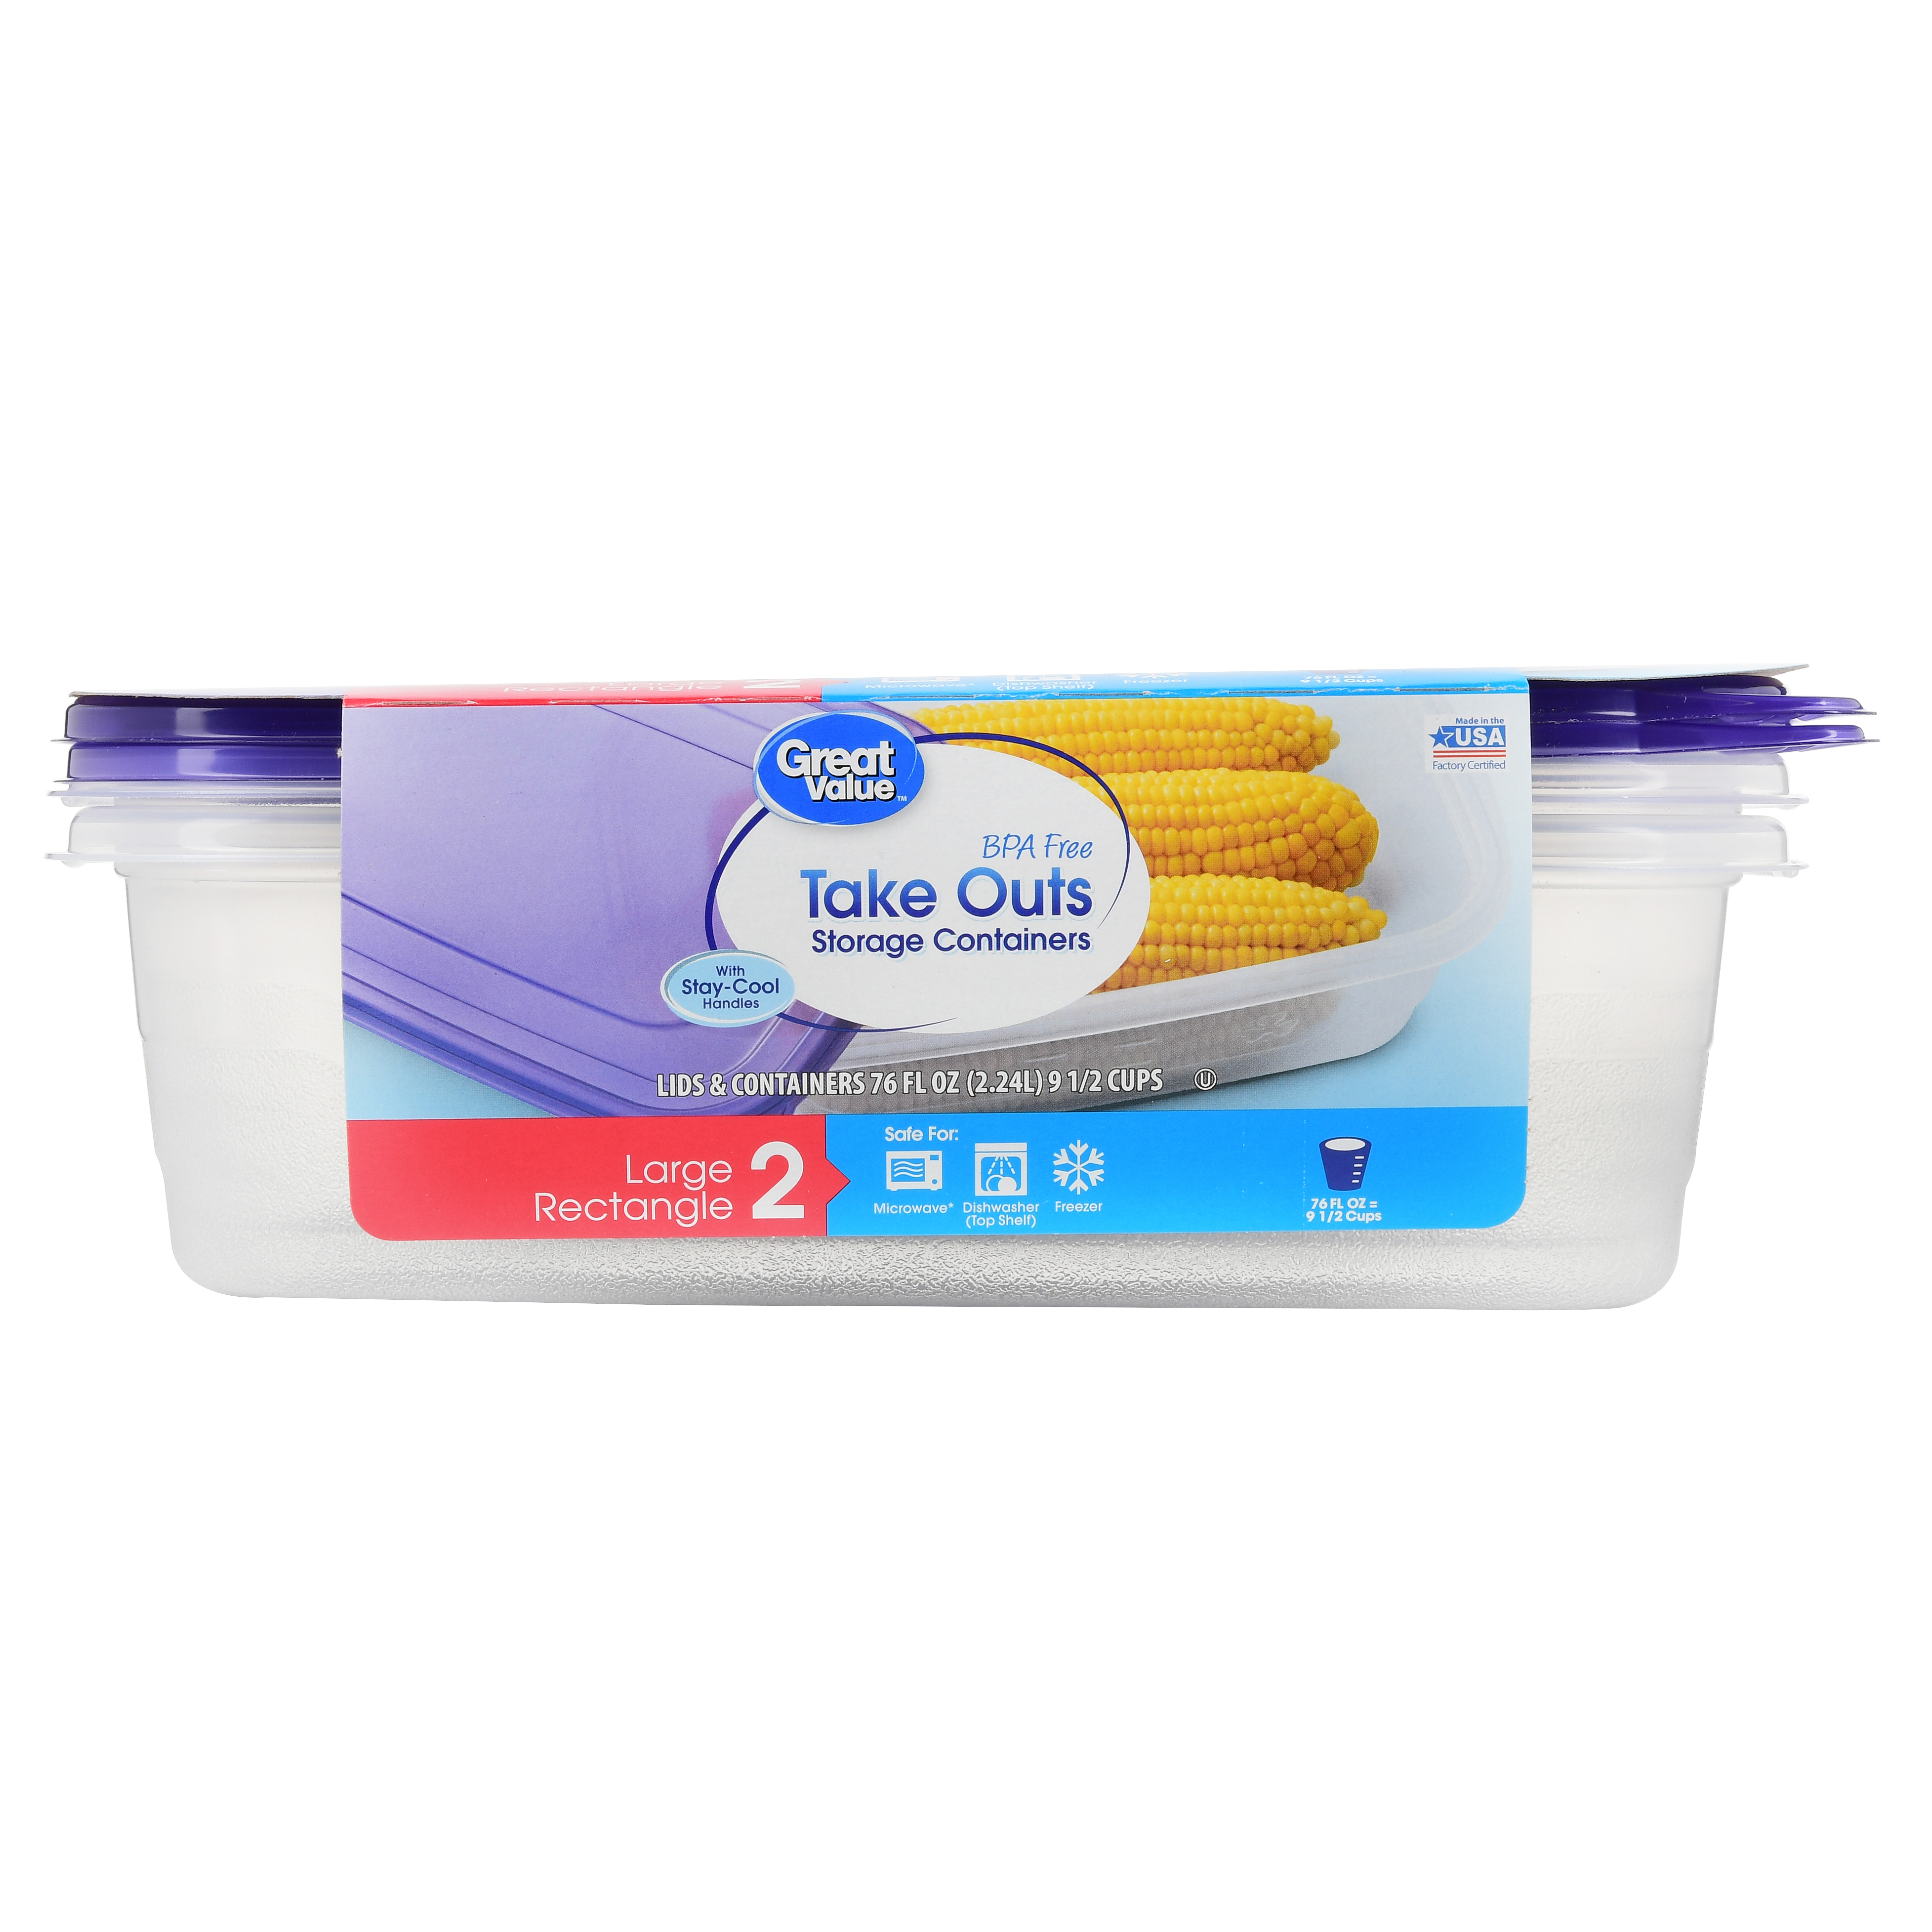 Great Value Take Outs Storage Container, BPA Free, Large Rectangle, 2 Count - image 1 of 5